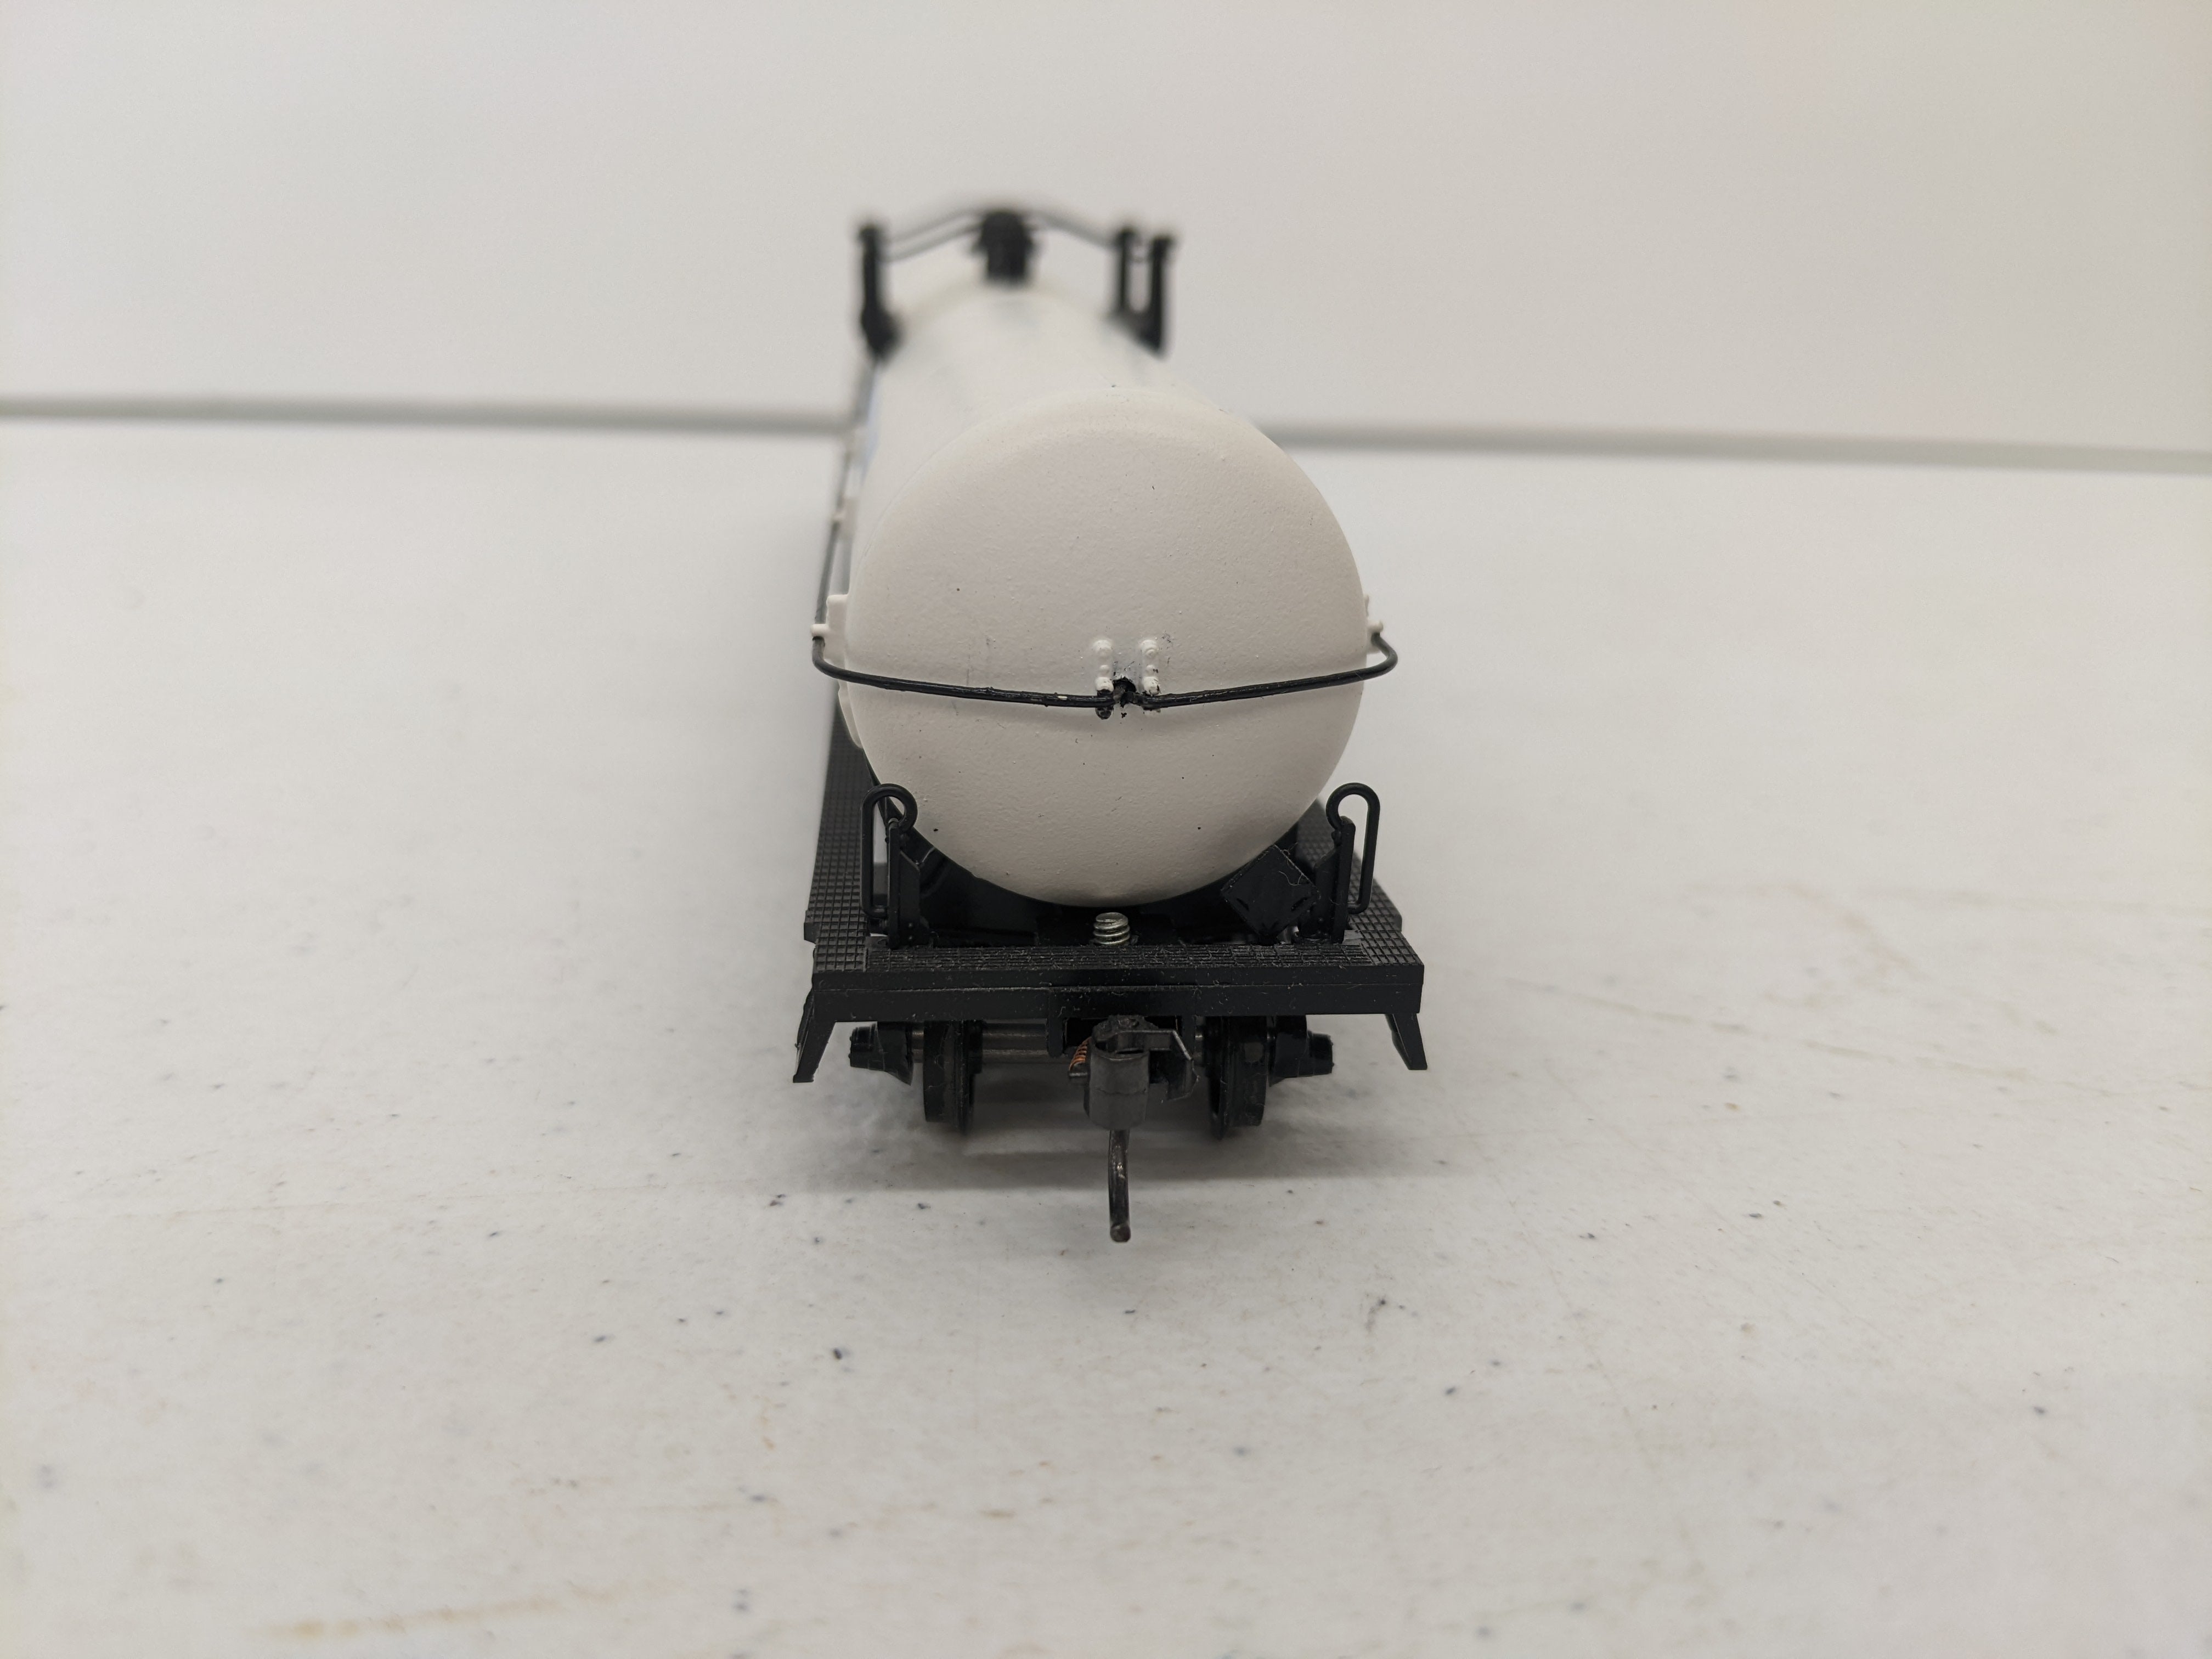 USED Athearn HO Scale, 60' Tank Car, Consolidated Gas Supply Corp., General American Marks (GATX Corporation) GATX #94378